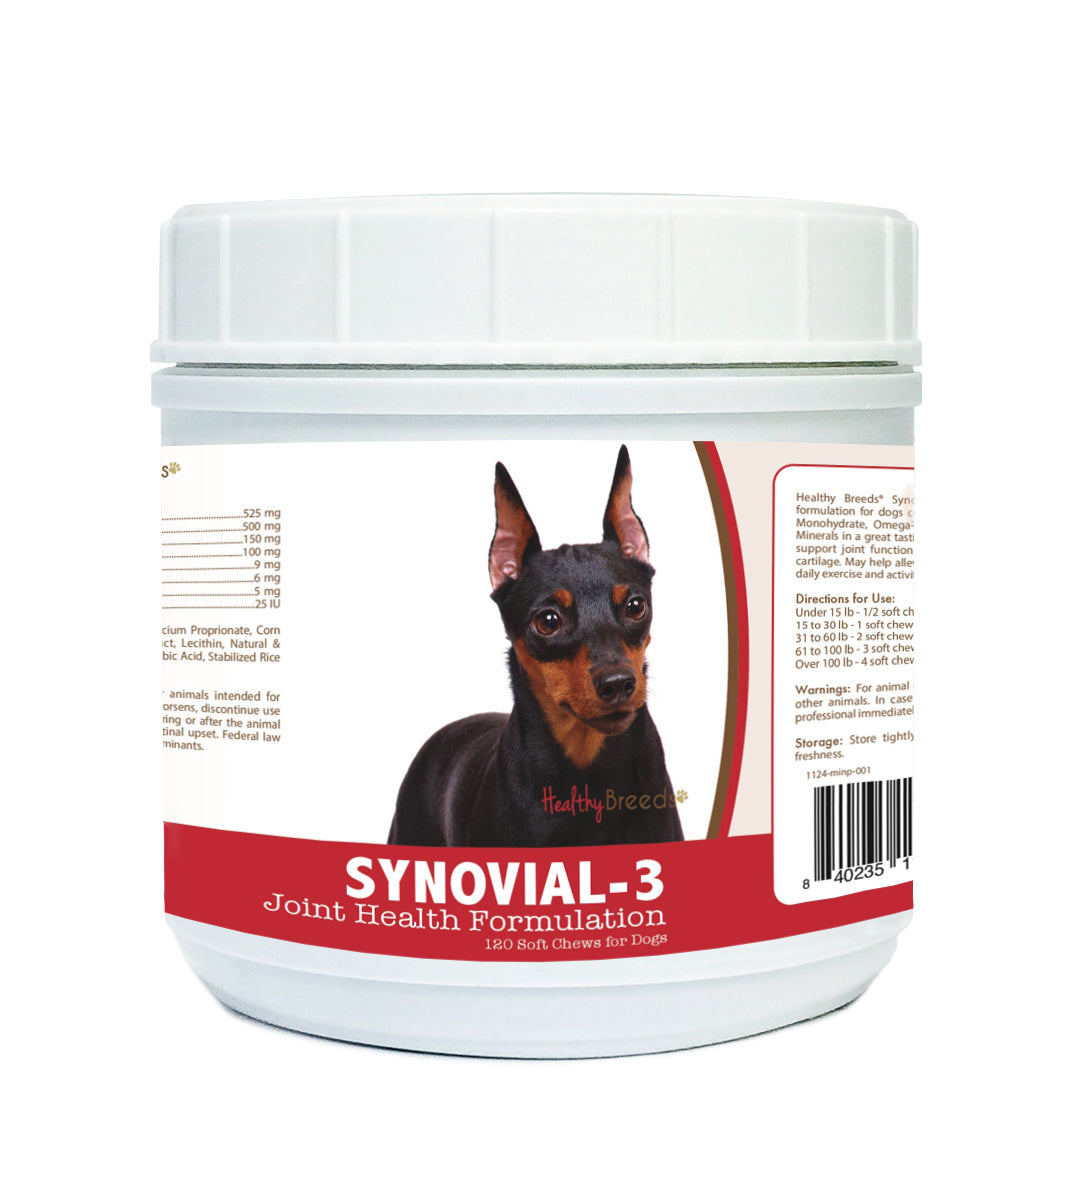 Miniature Pinscher Synovial-3 Joint Health Formulation Soft Chews 120 Count